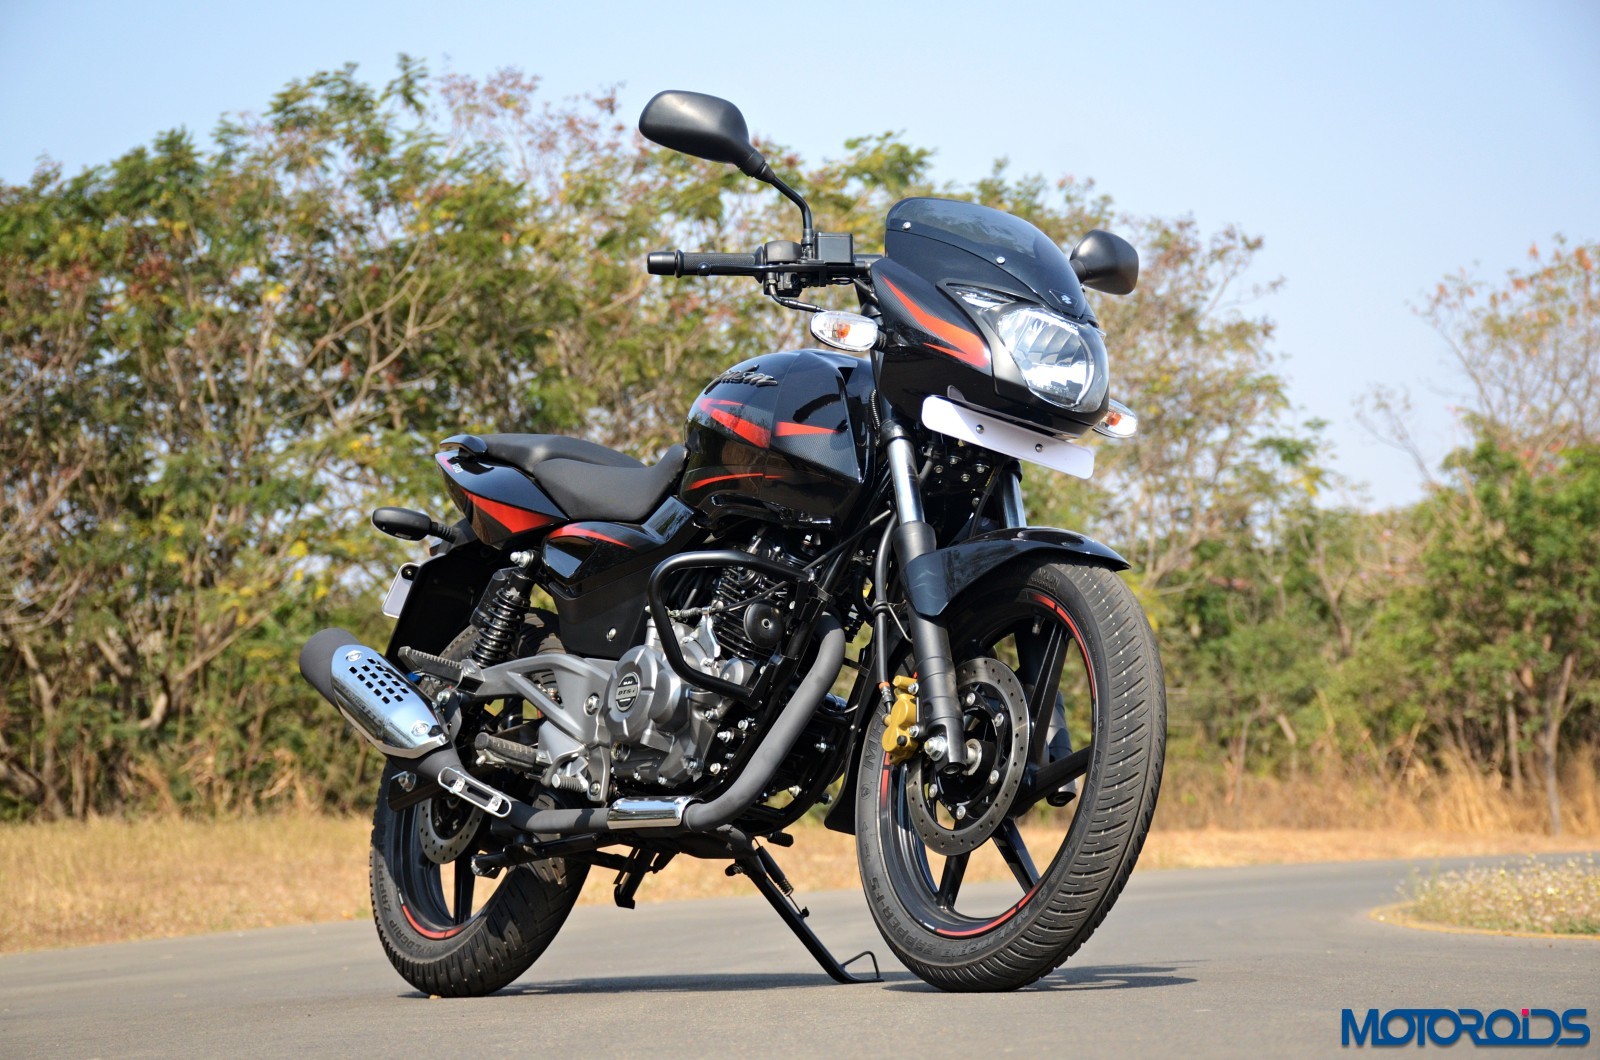 2017 Bajaj Pulsar 180 Dts I First Ride Review List Of Changes